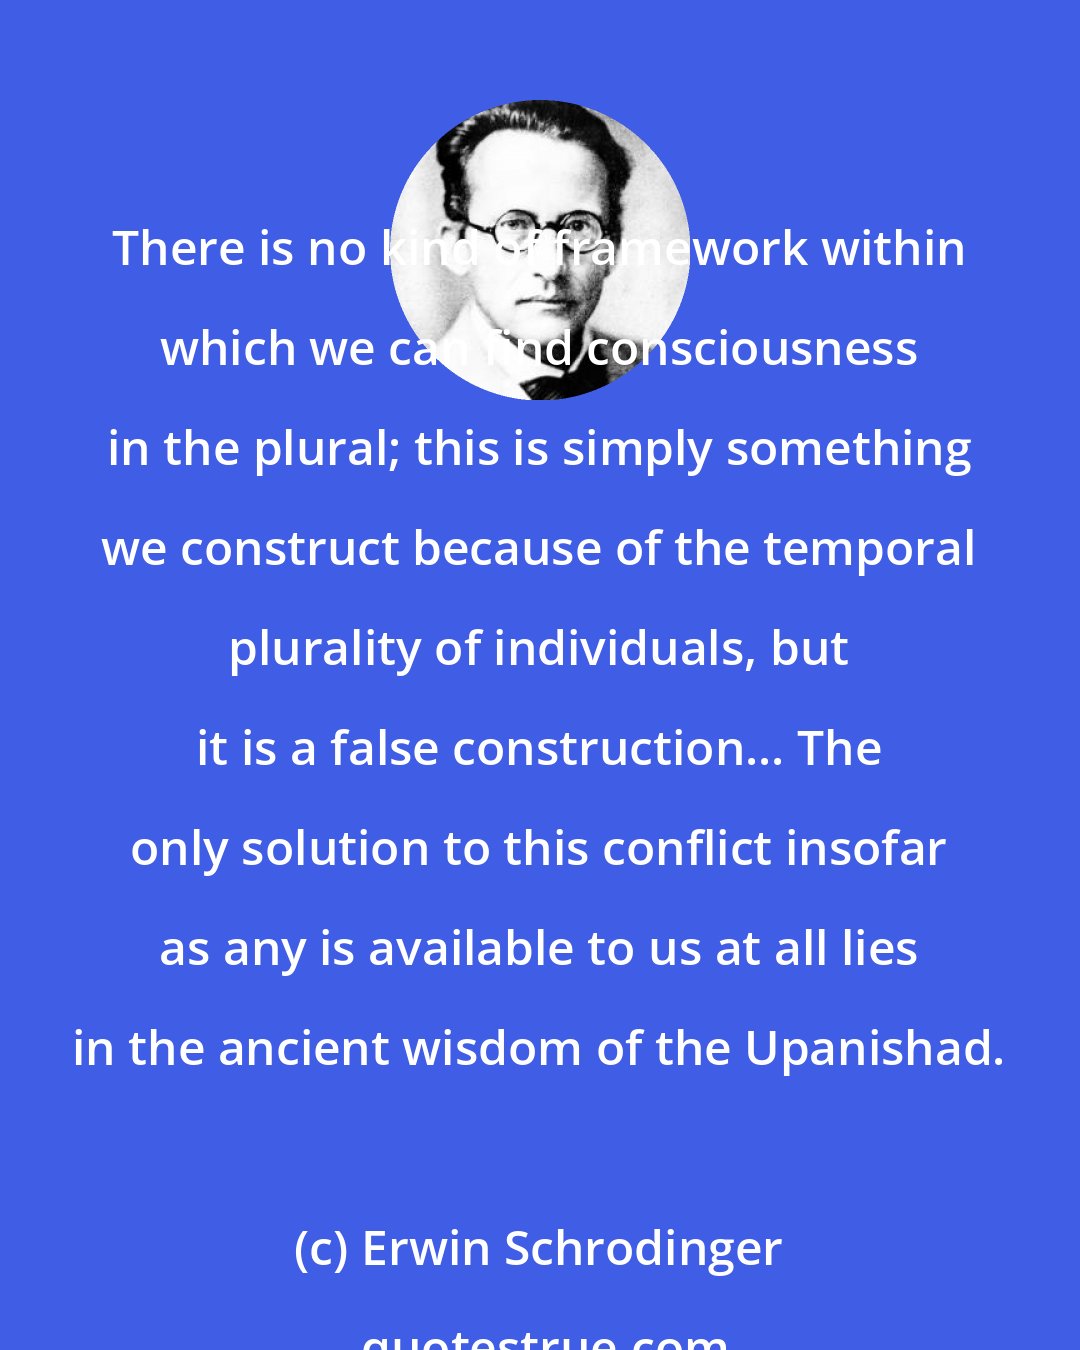 Erwin Schrodinger: There is no kind of framework within which we can find consciousness in the plural; this is simply something we construct because of the temporal plurality of individuals, but it is a false construction... The only solution to this conflict insofar as any is available to us at all lies in the ancient wisdom of the Upanishad.